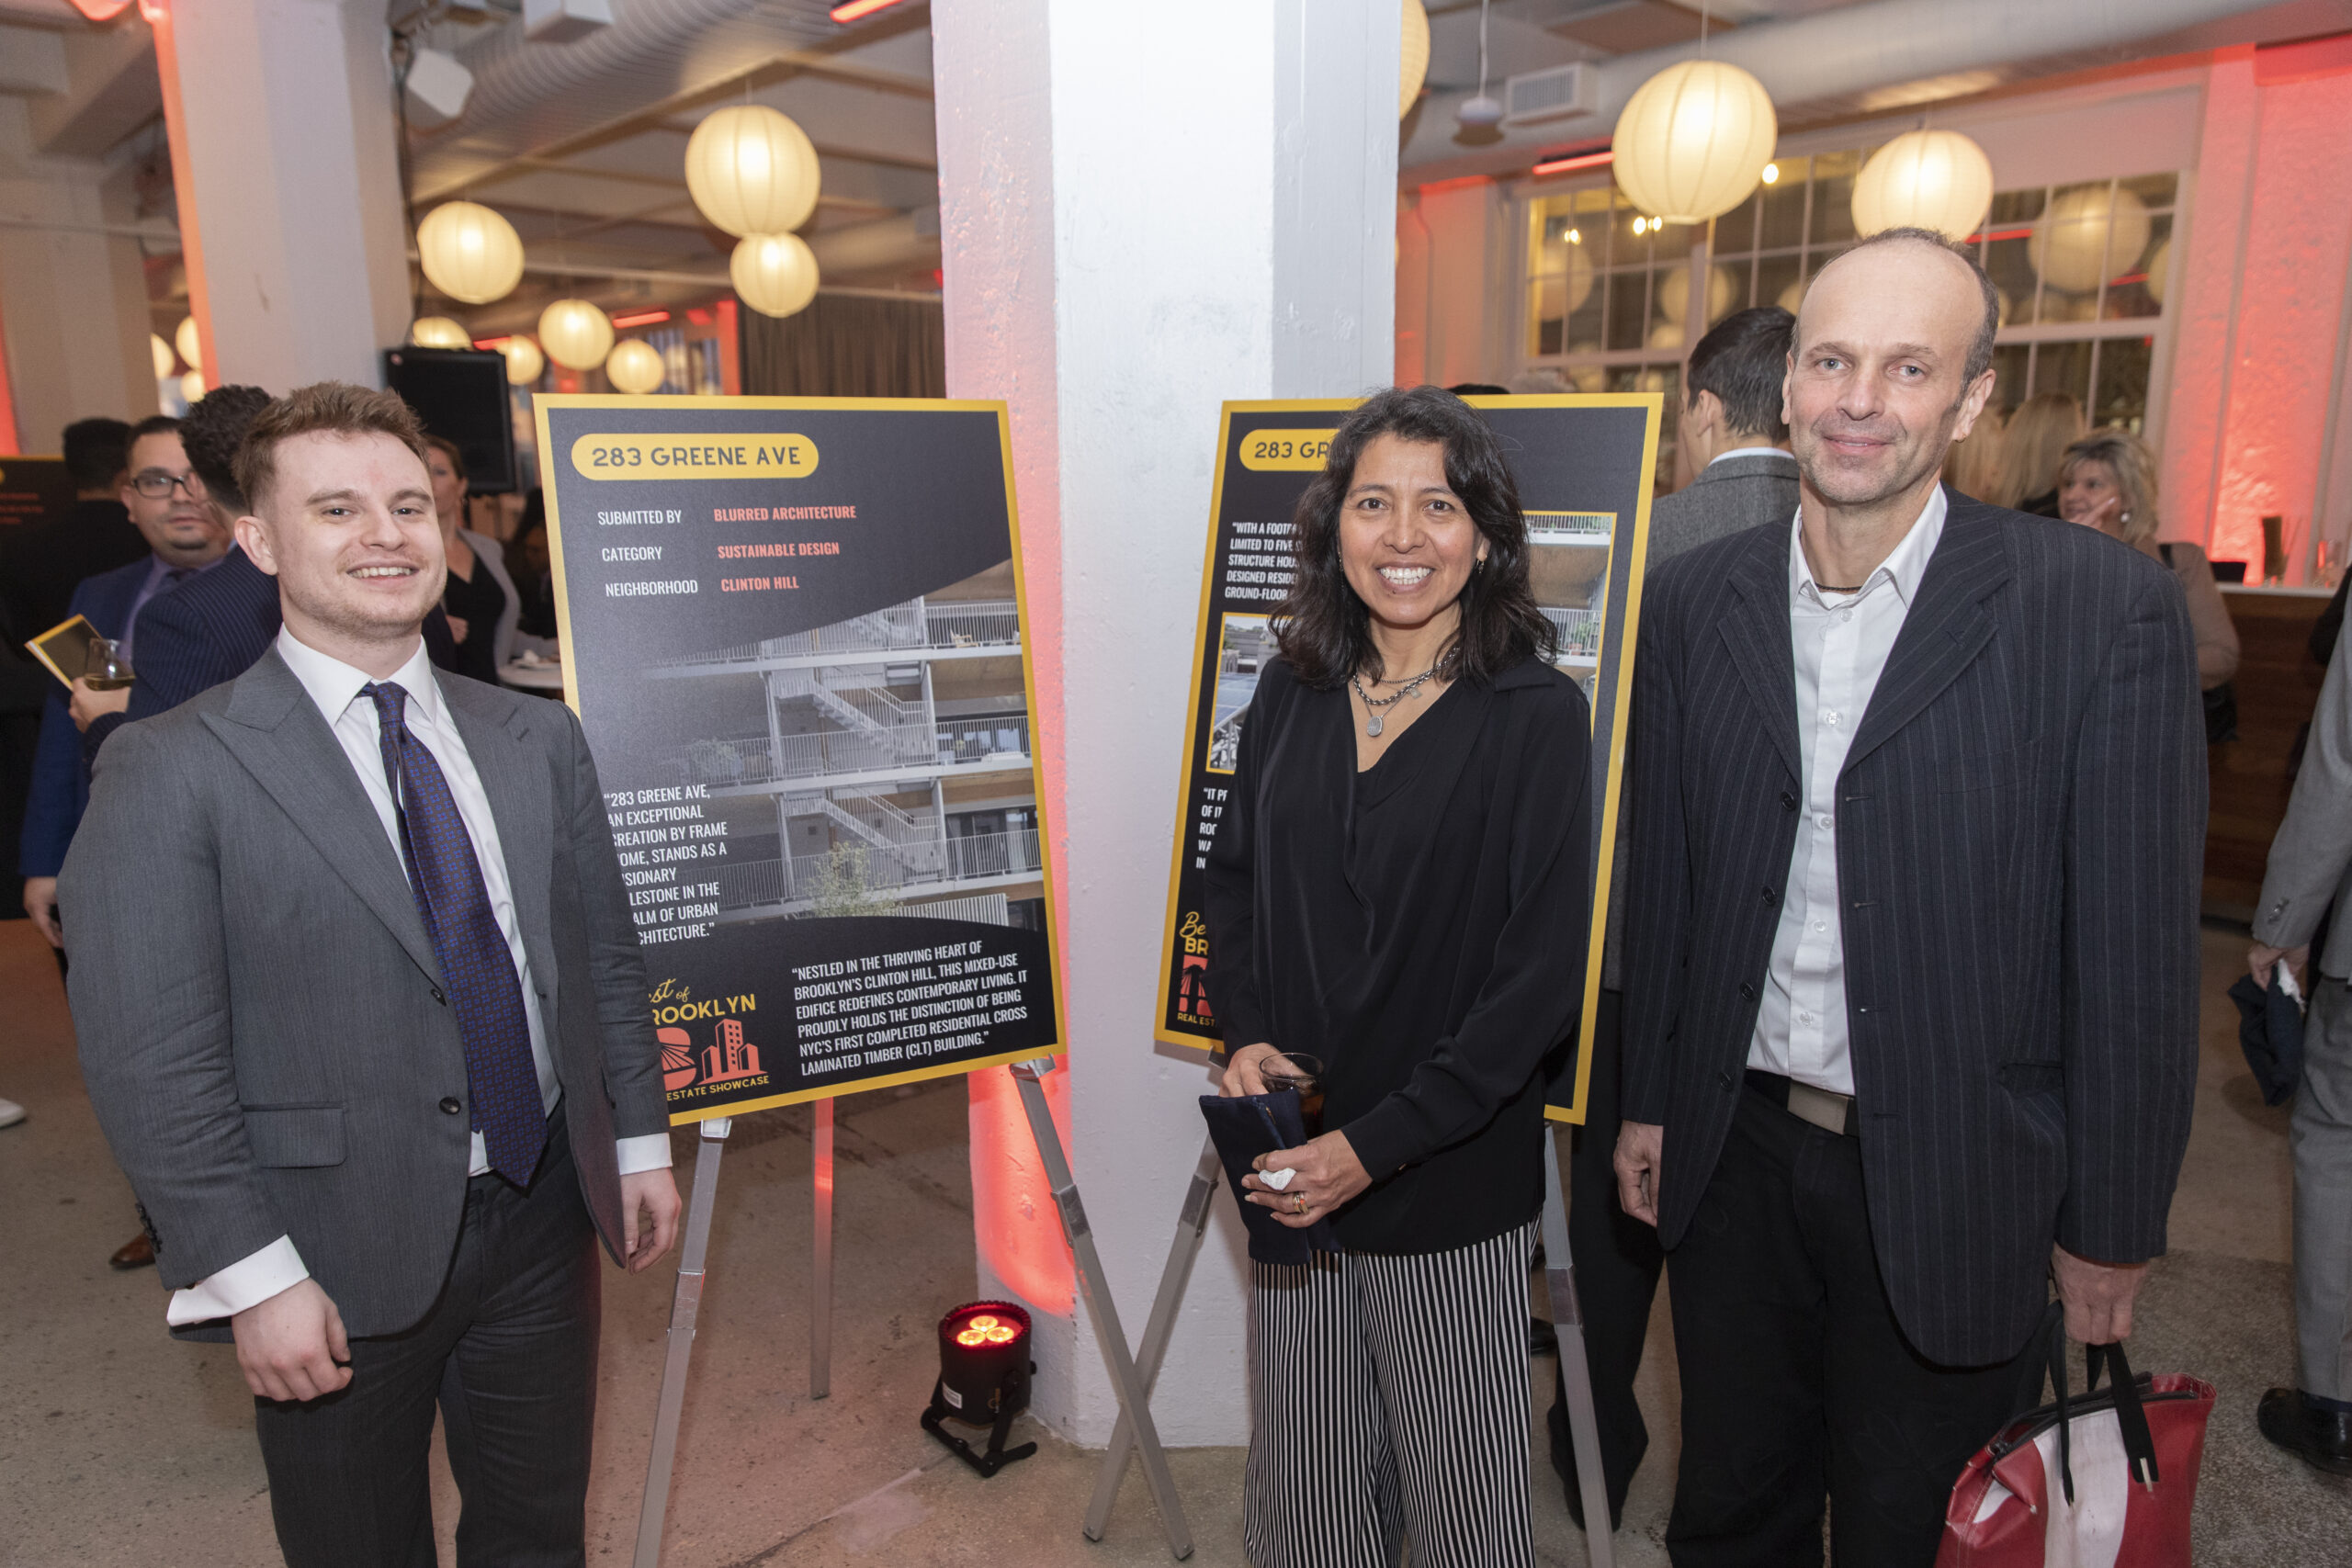 Paolo Hockenmaier, Sandra Arias and Werner Morath next to their Project at Best of Brooklyn Real Estate Showcase.